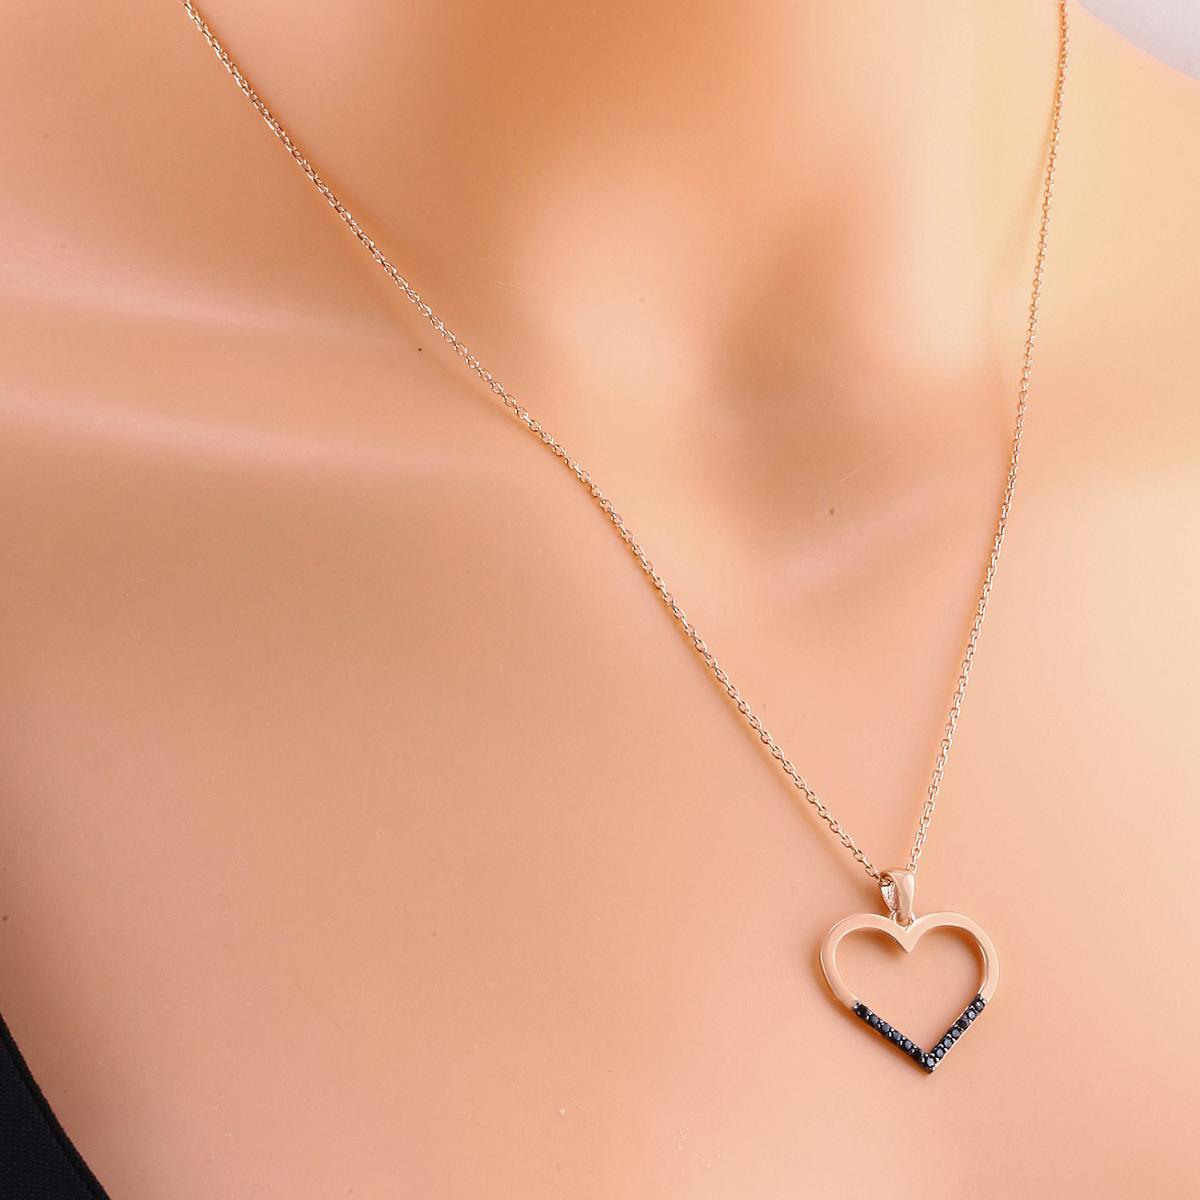 Heart Shaped Necklace • Heart Pendant Necklace • Heart Necklace Silver - Trending Silver Gifts